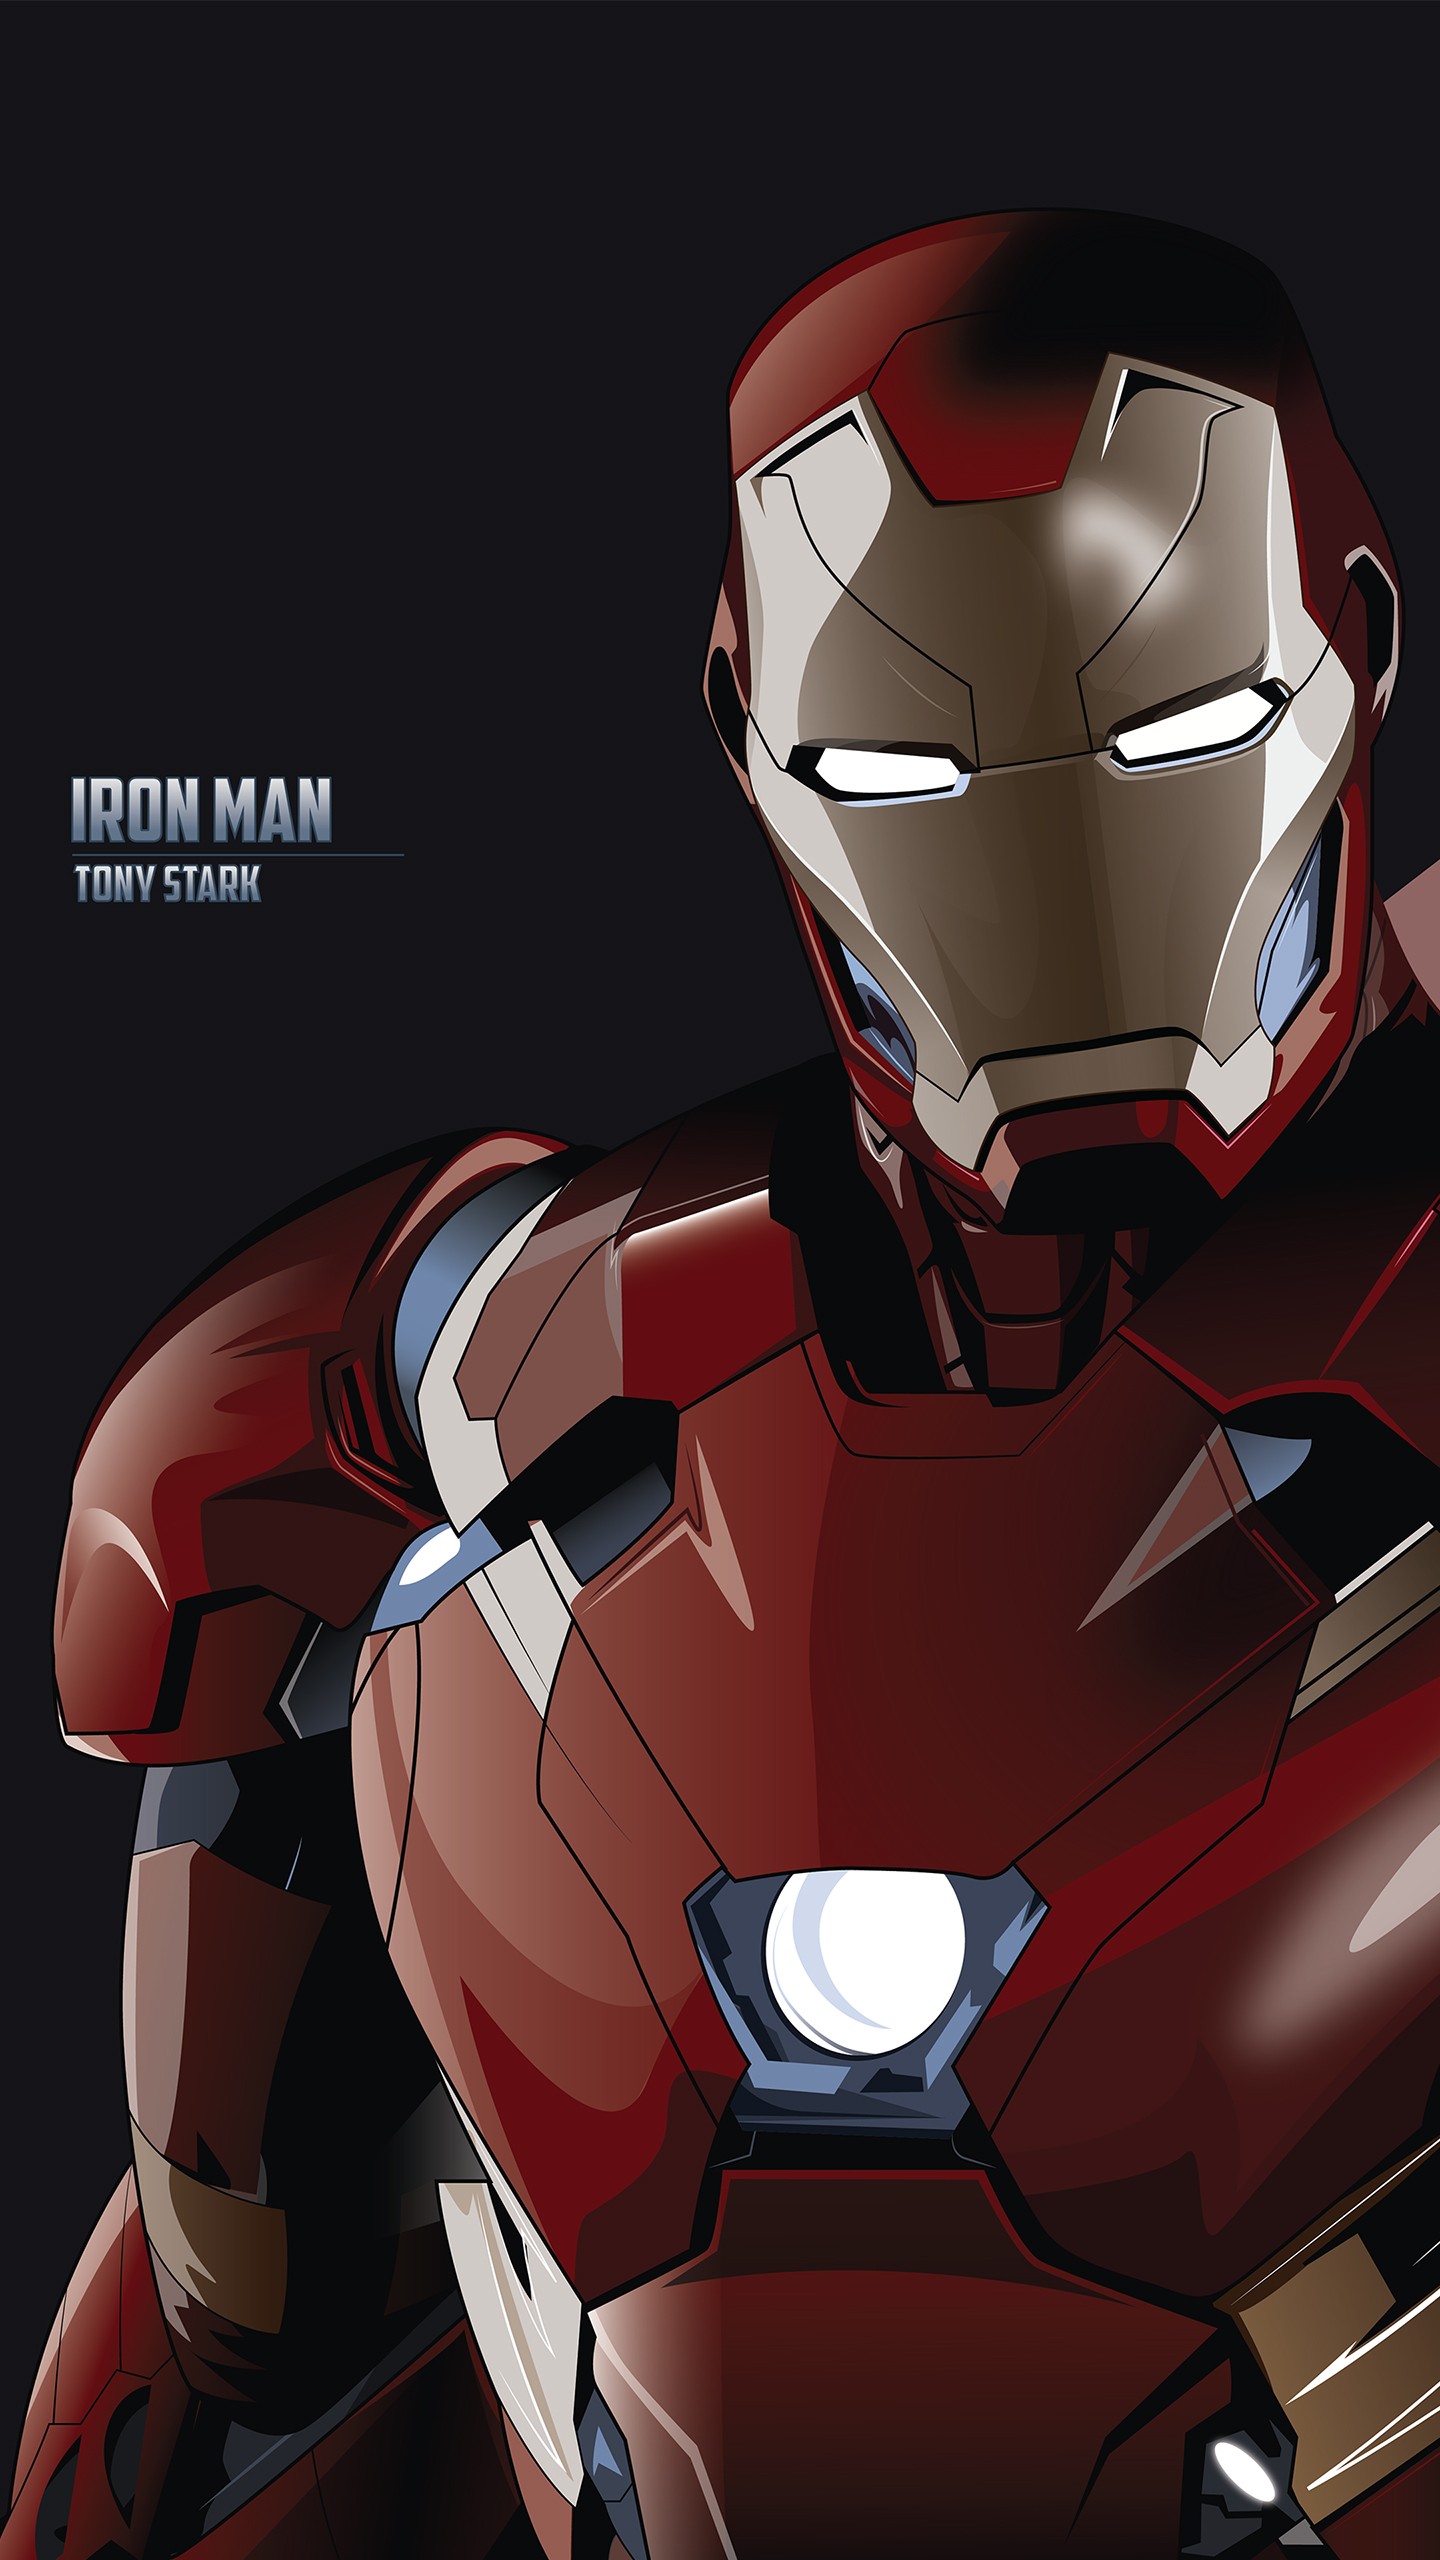 iron man wallpaper hd for android,fictional character,superhero,iron man,war machine,suit actor